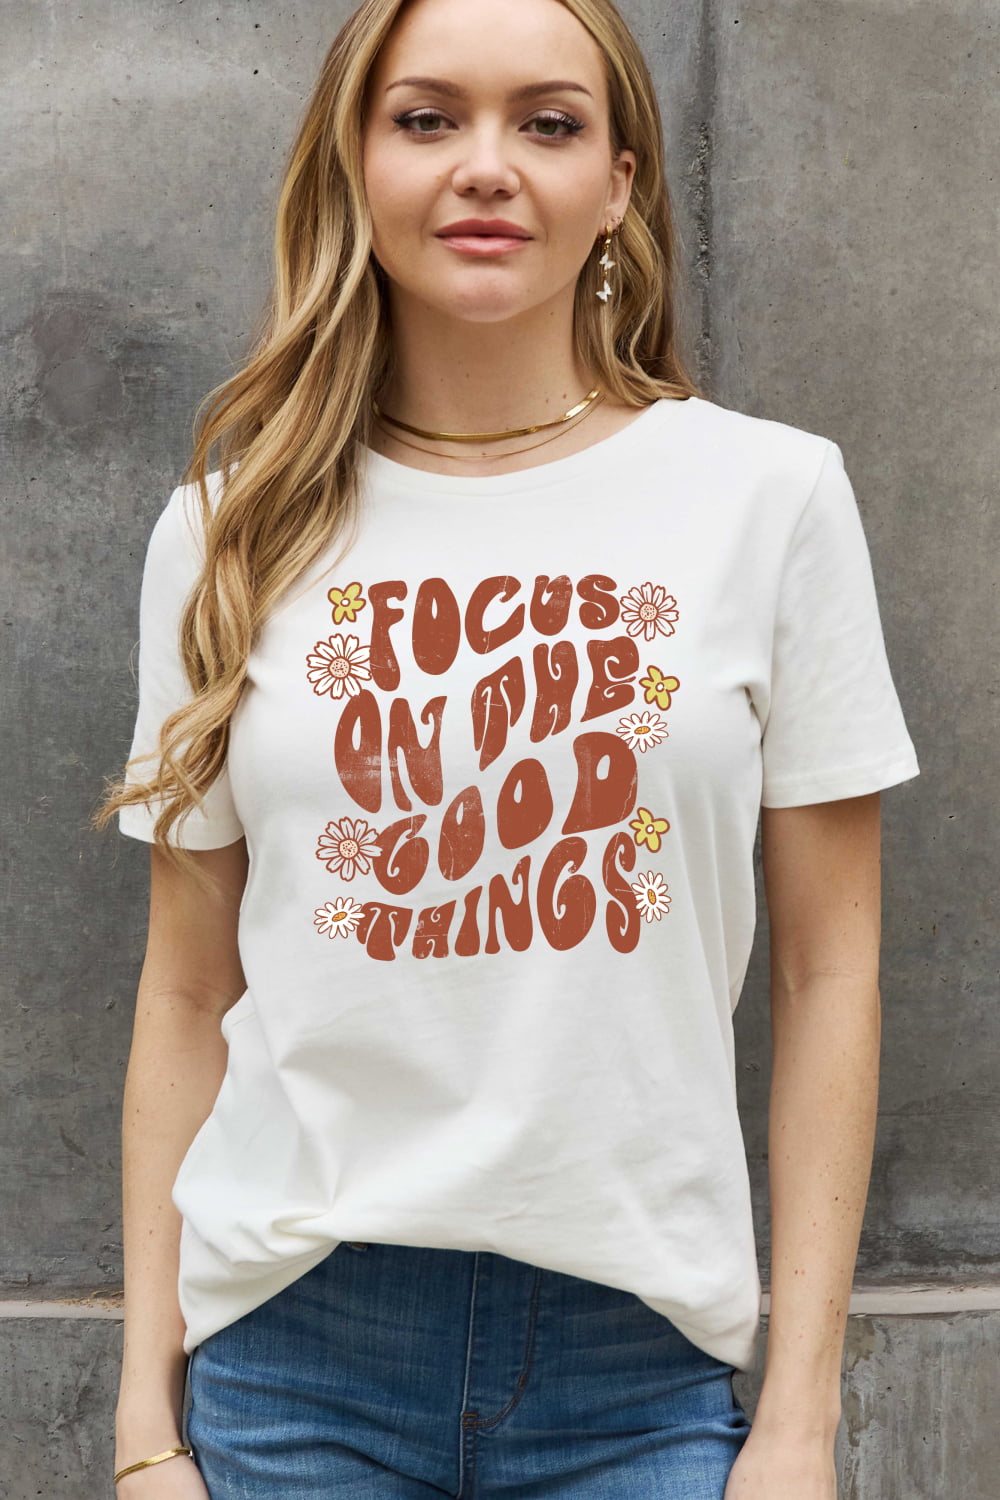 FOCUS ON THE GOOD THINGS Graphic Cotton Tee - White / S - T-Shirts - Shirts & Tops - 1 - 2024